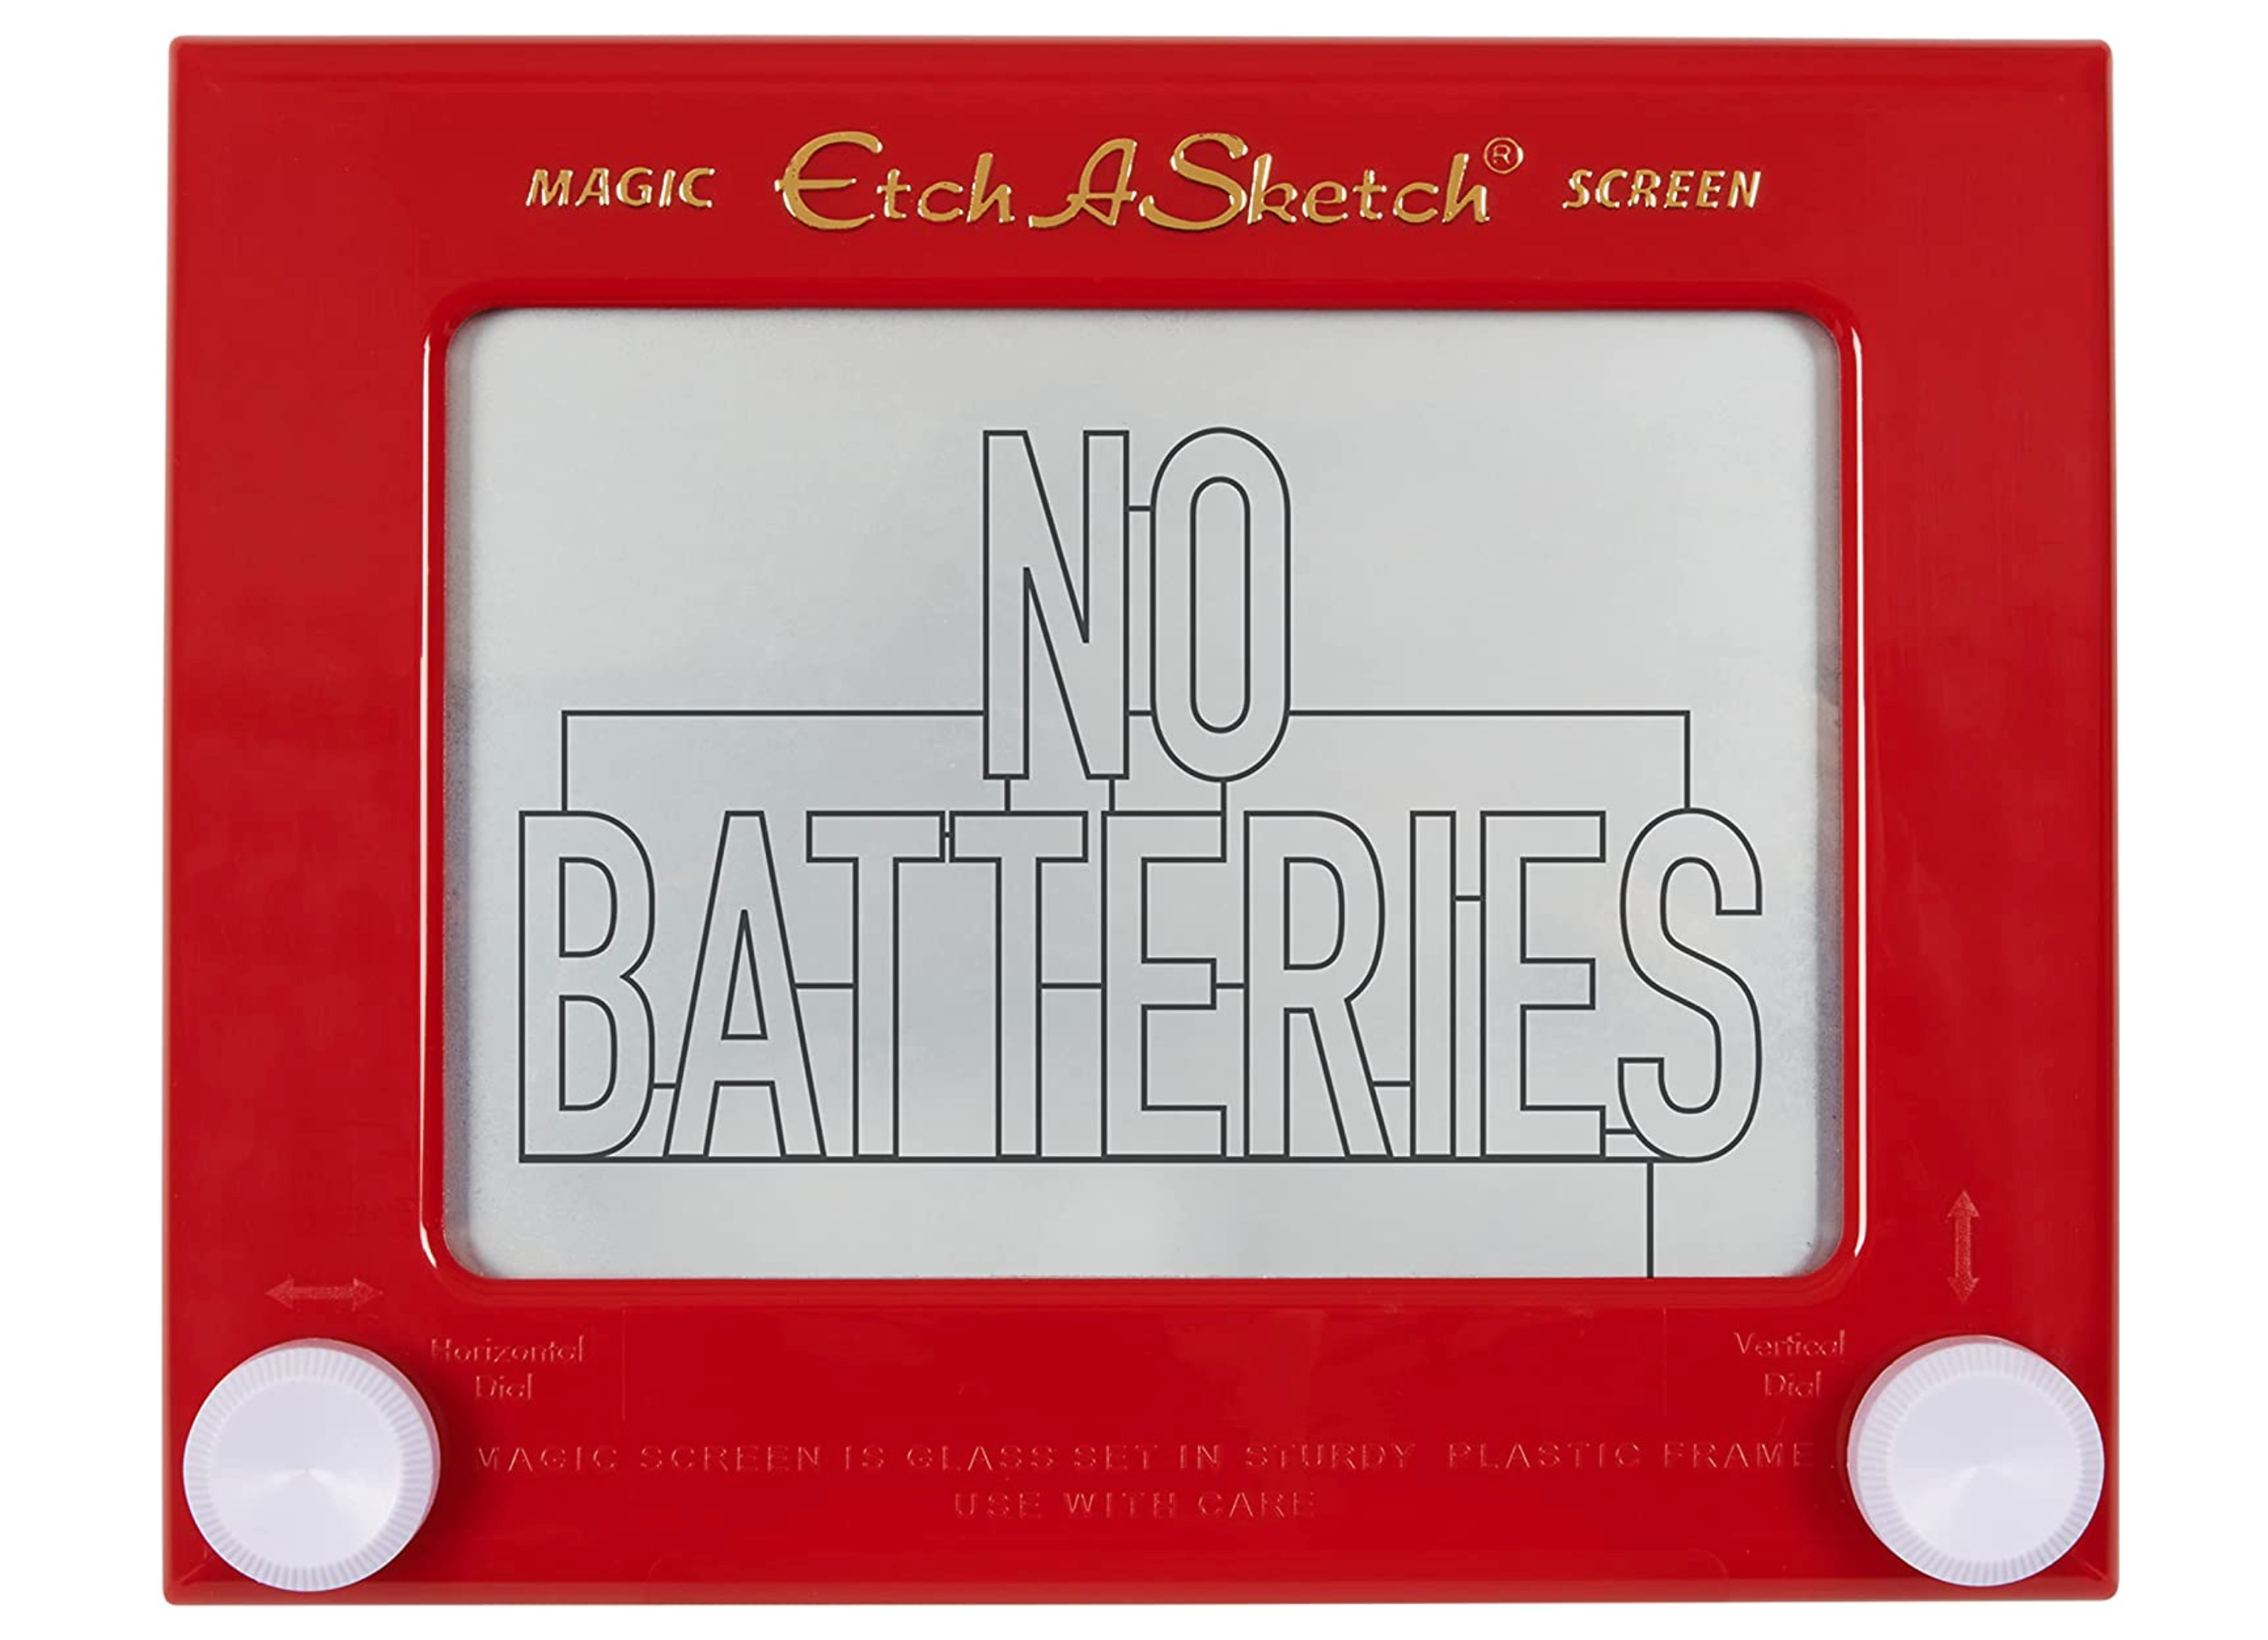 Etch a sketch turns 60, News & Stories